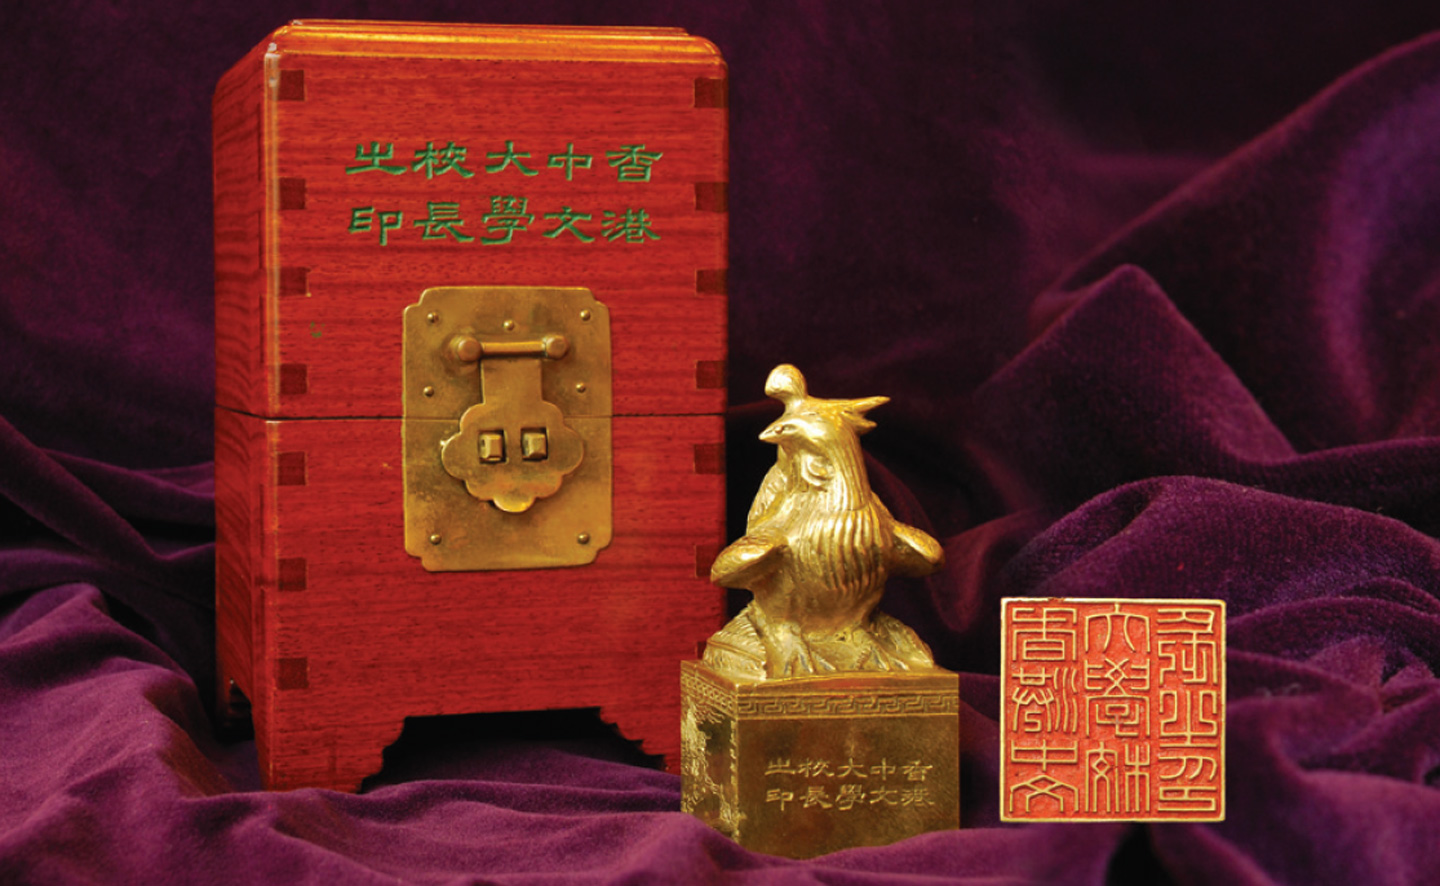 The Vice-Chancellor’s seal and box set